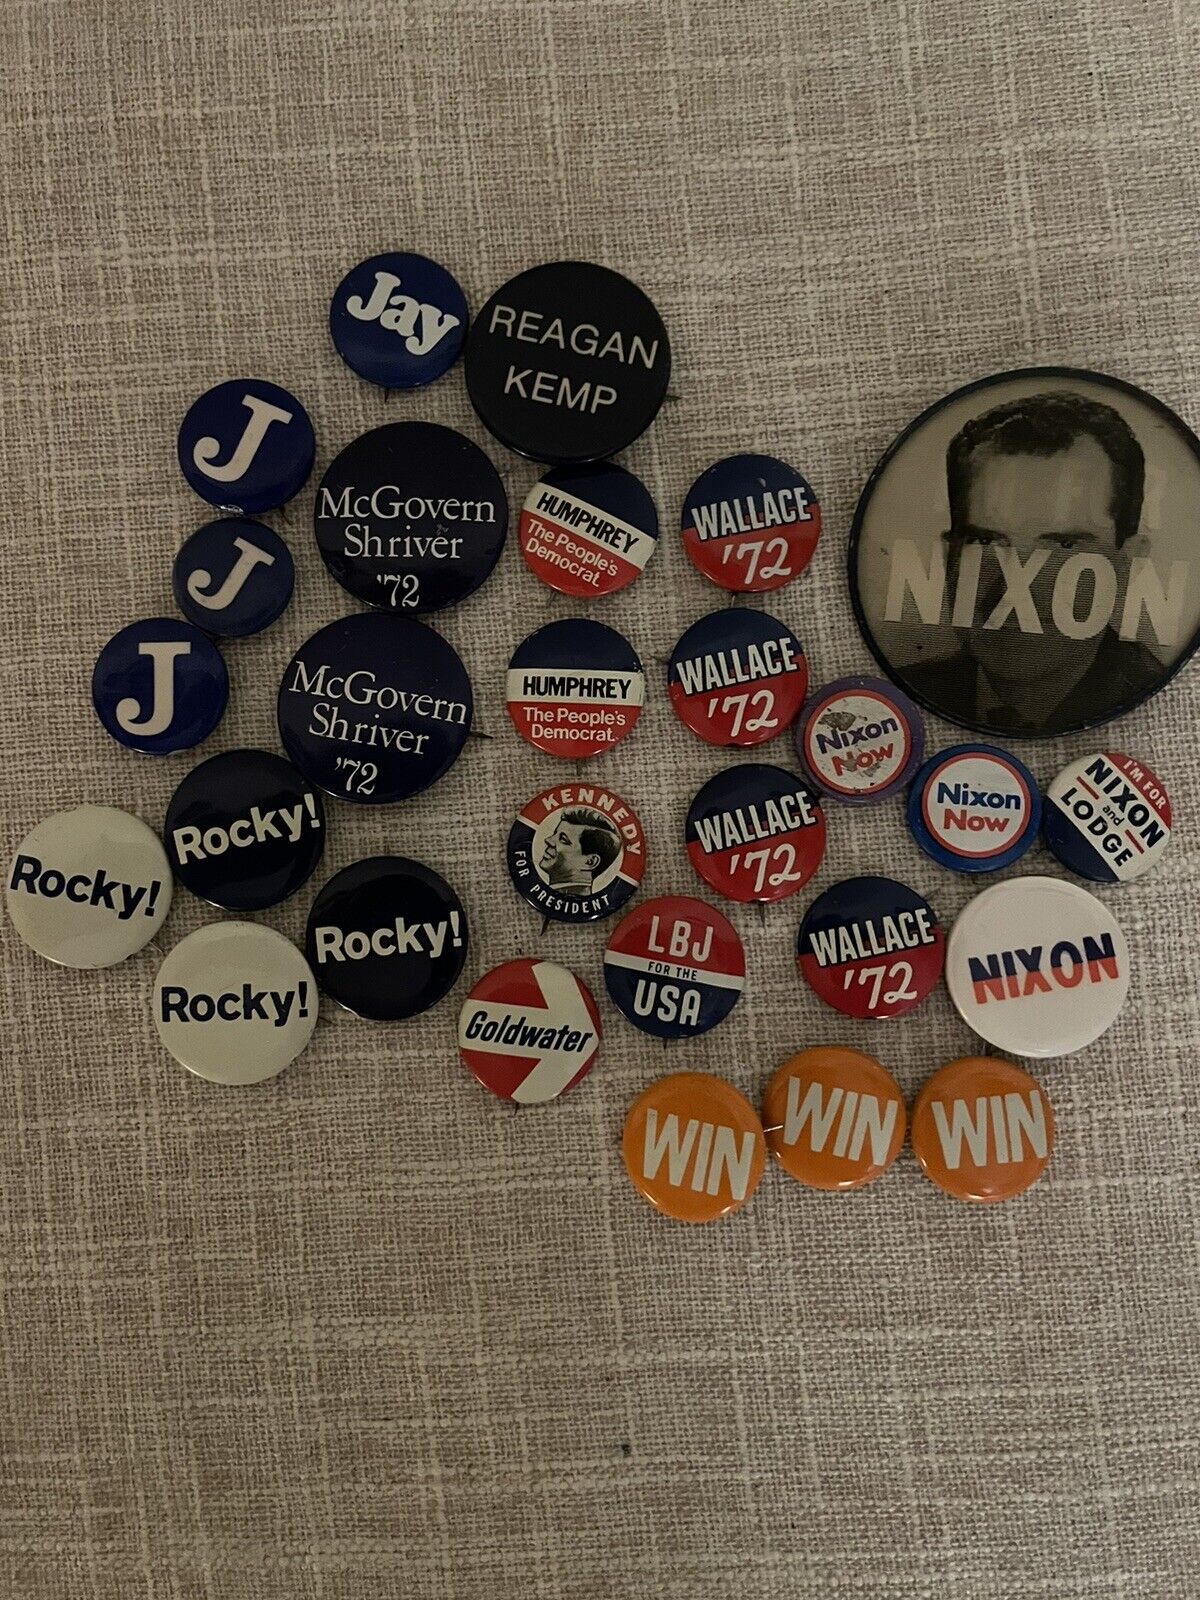 60-70’s Nixon/Kennedy/LBJ/Goldwater/Humphrey/Goldwater/Wallace Campaign Pins